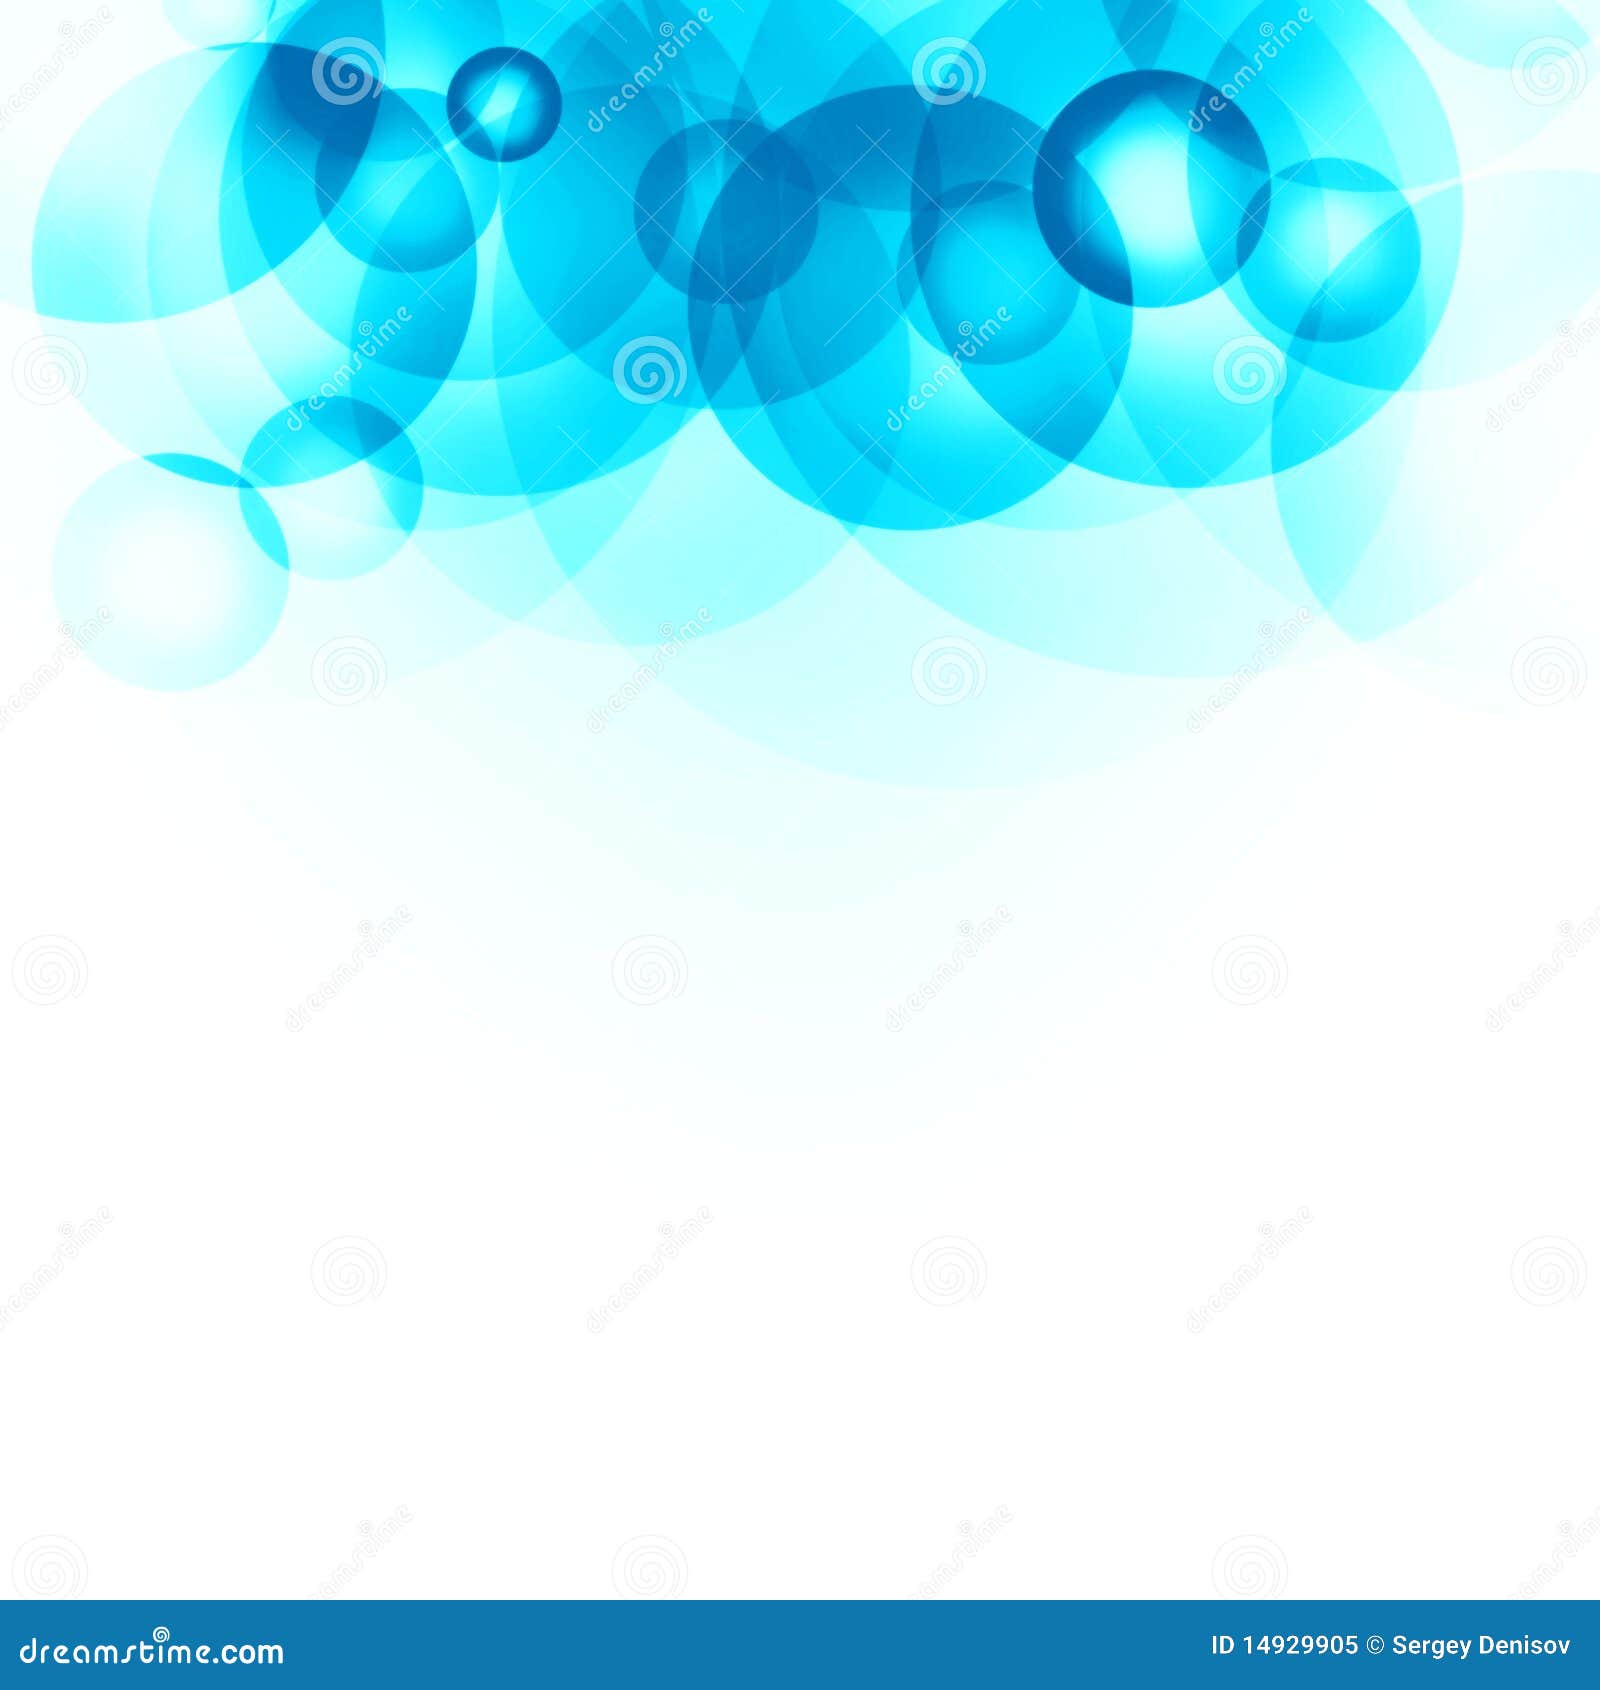 blue circles on a white background